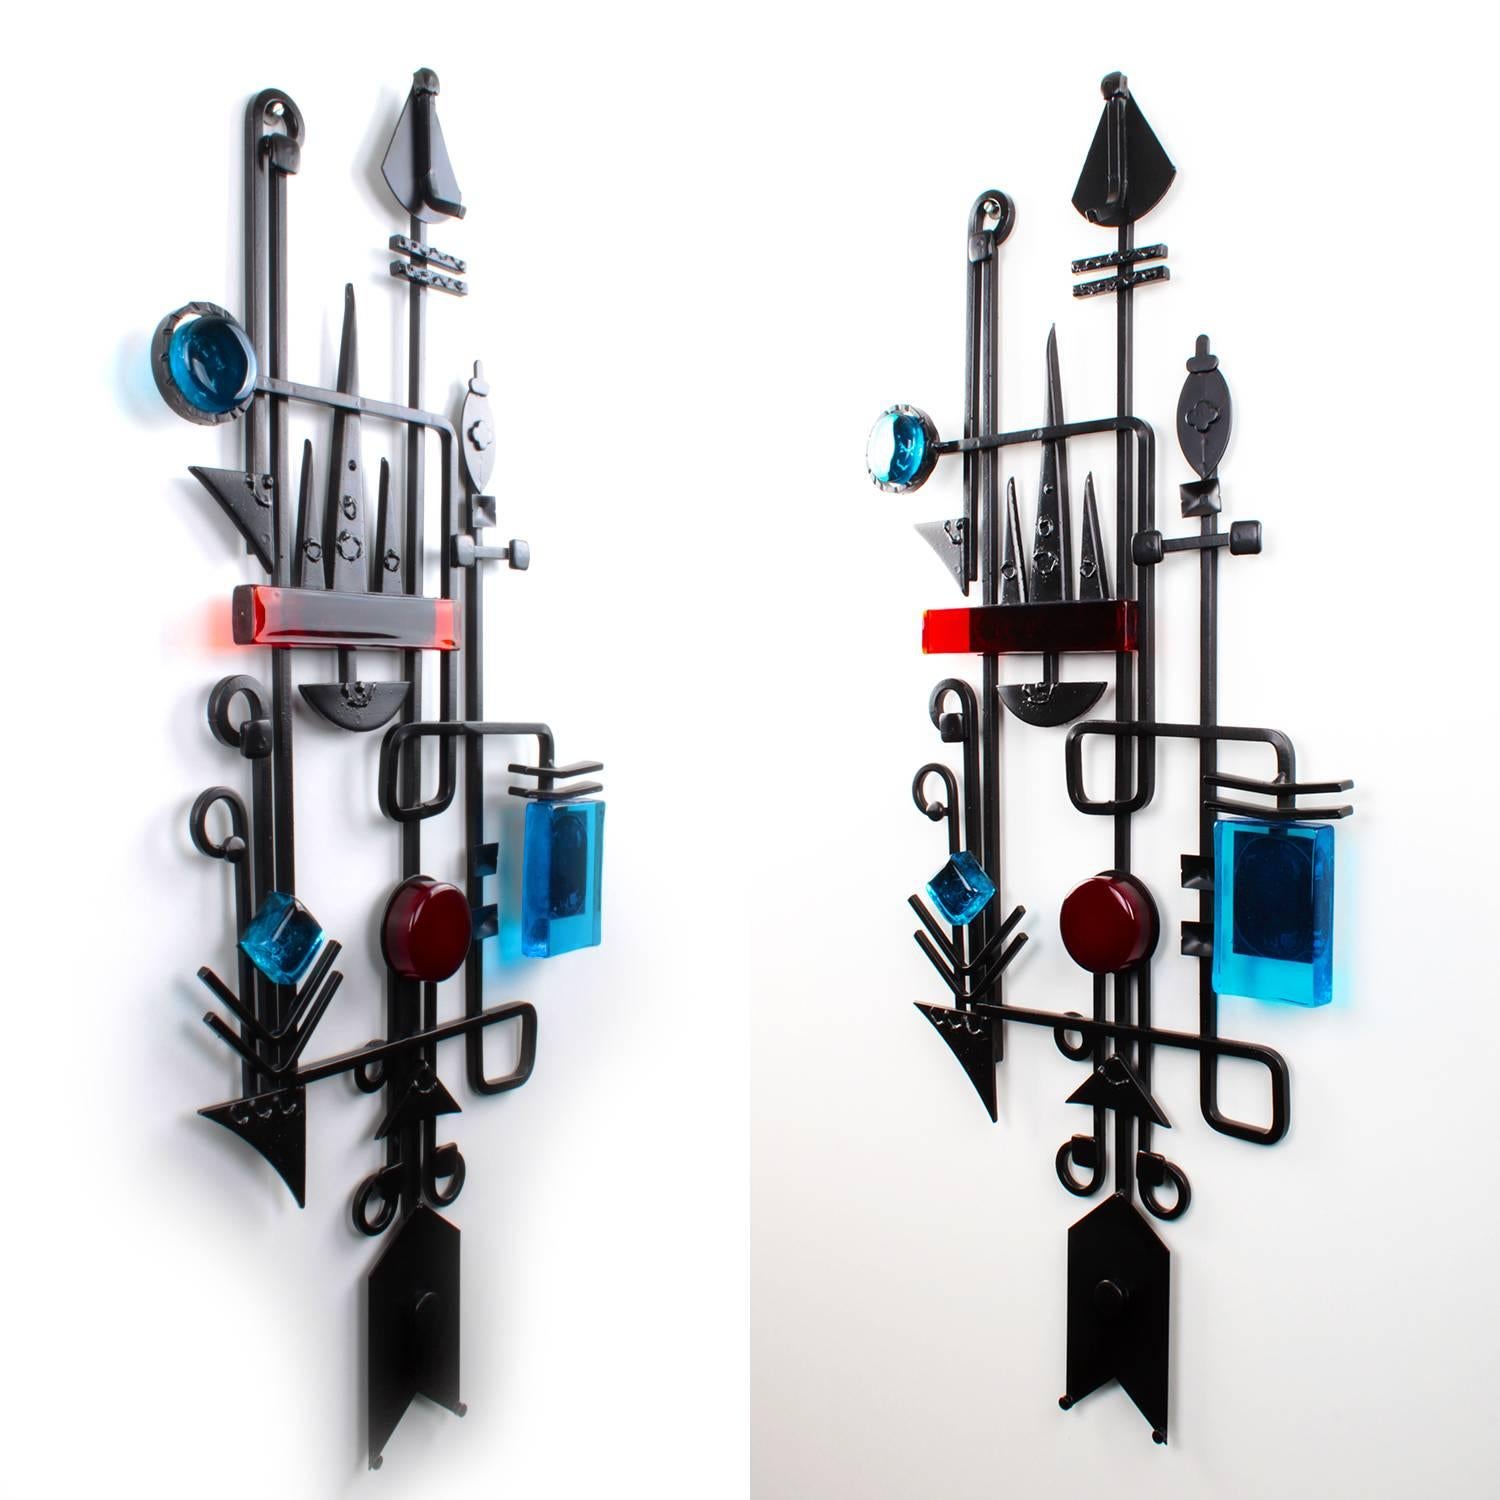 Wall sculpture by Dantoft Kunstartikler, Denmark, circa 1960s. Unique artisan work in wrought iron with glass pieces in clear blue, dark red and orange.

Wondrous collage of imagination and geometric shapes-materialized in black, welded wrought